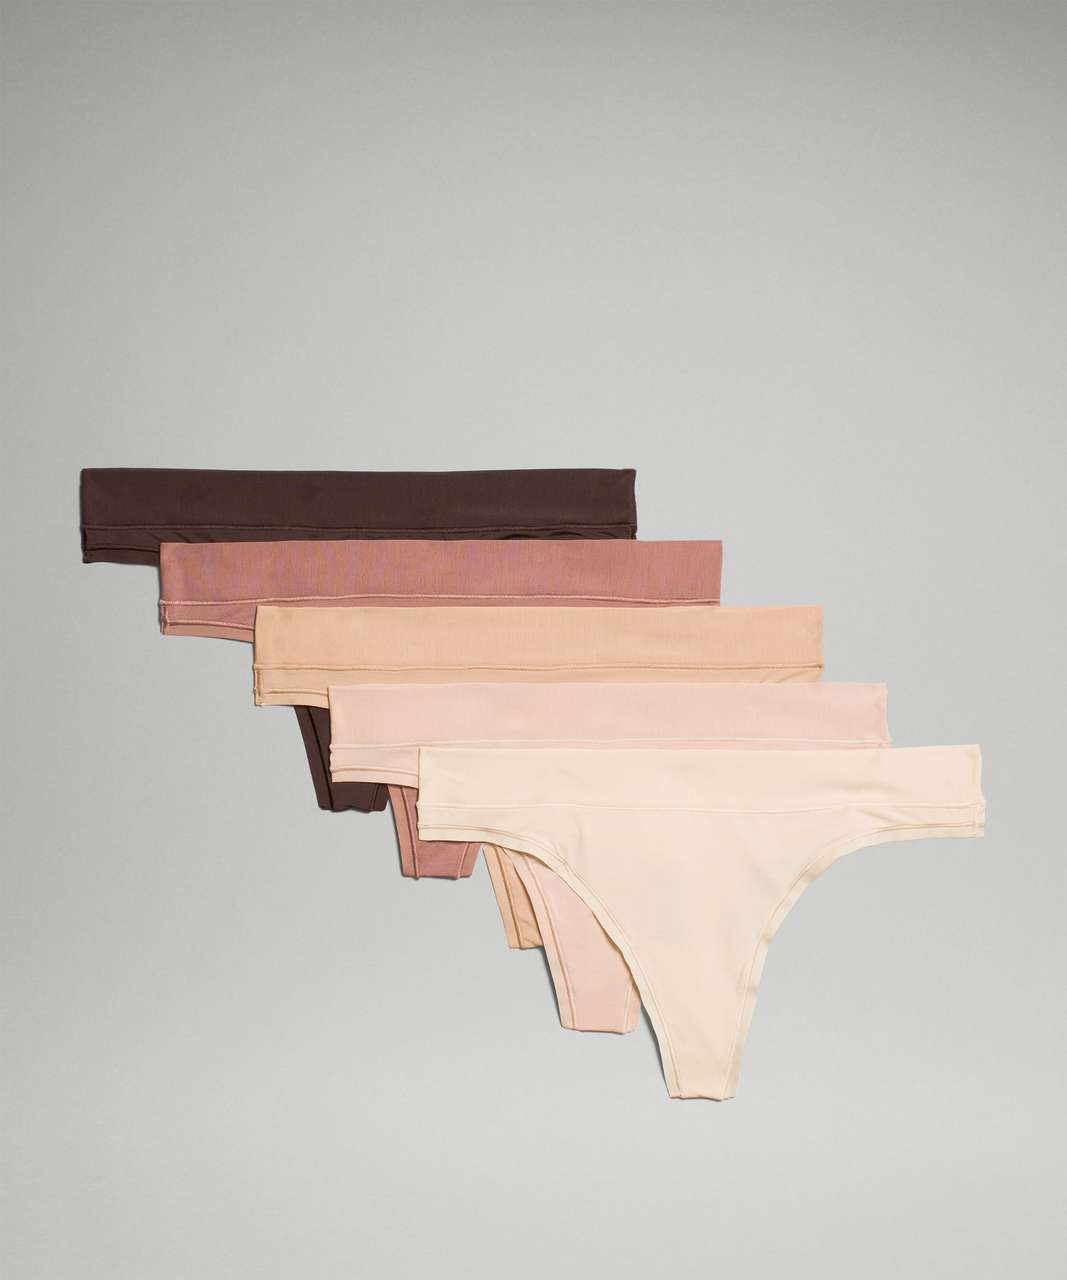 Lululemon UnderEase Mid-Rise Thong Underwear *5 Pack - French Press / Twilight Rose / Misty Shell / Pale Linen / Contour